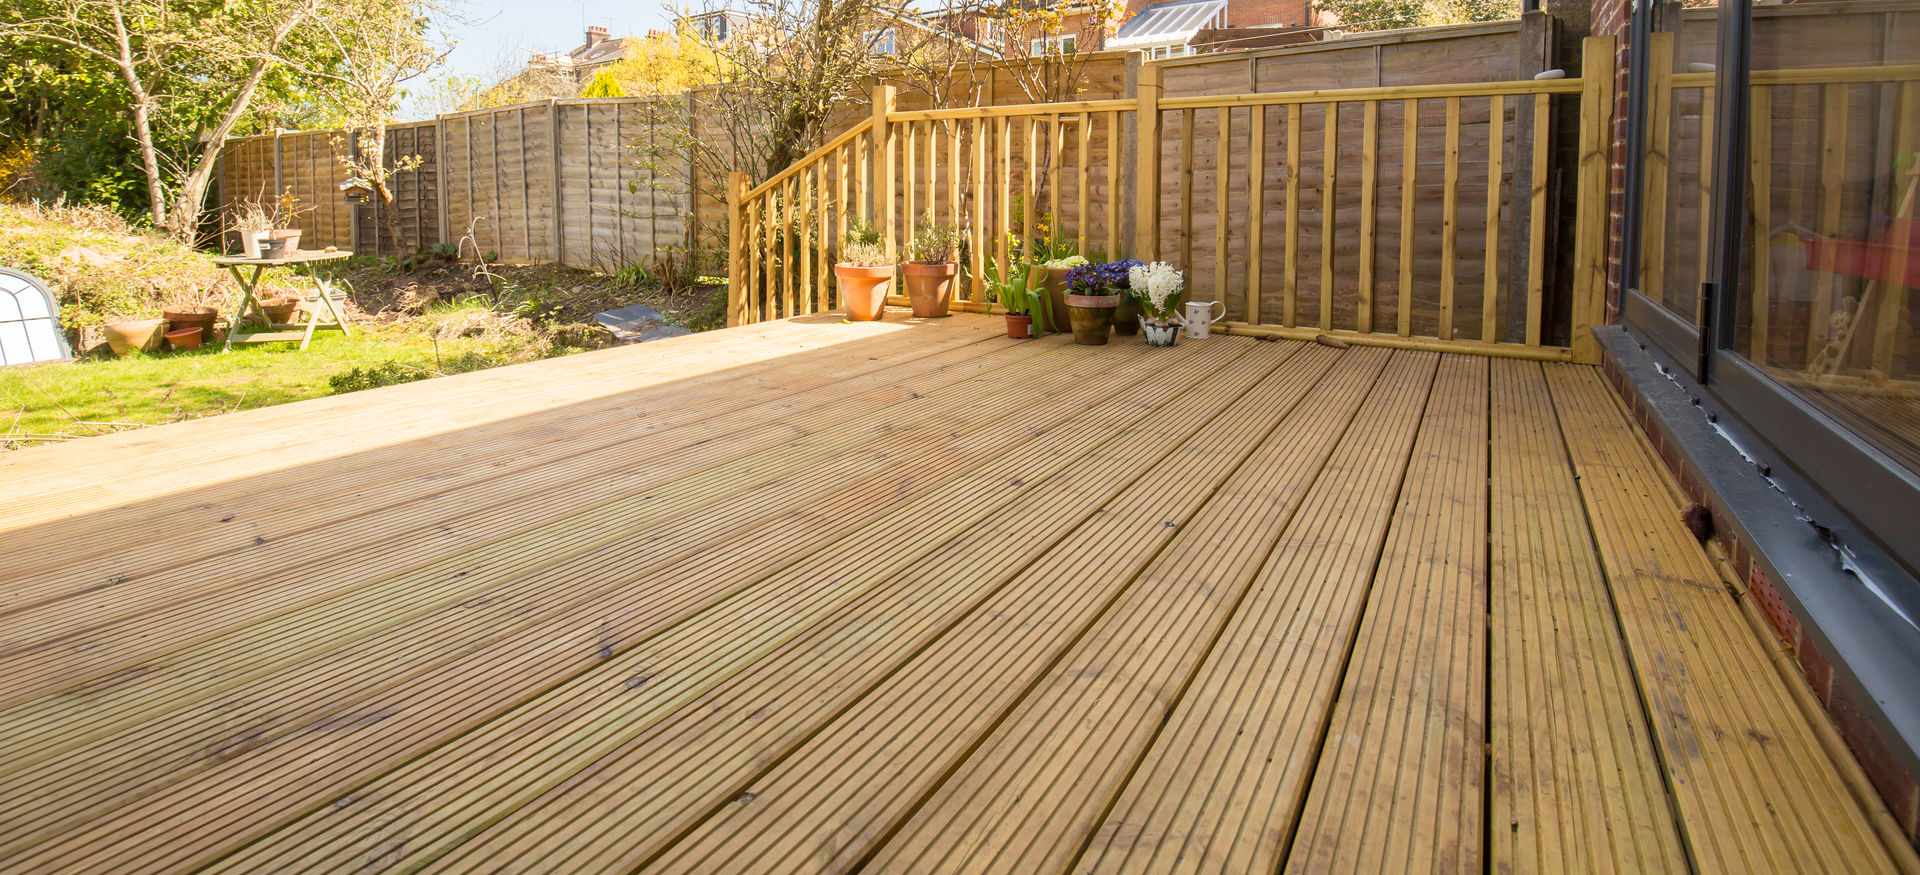 Can you imagine your summers out on this decking? homify Terrace لکڑی Wood effect patio,decking,garden